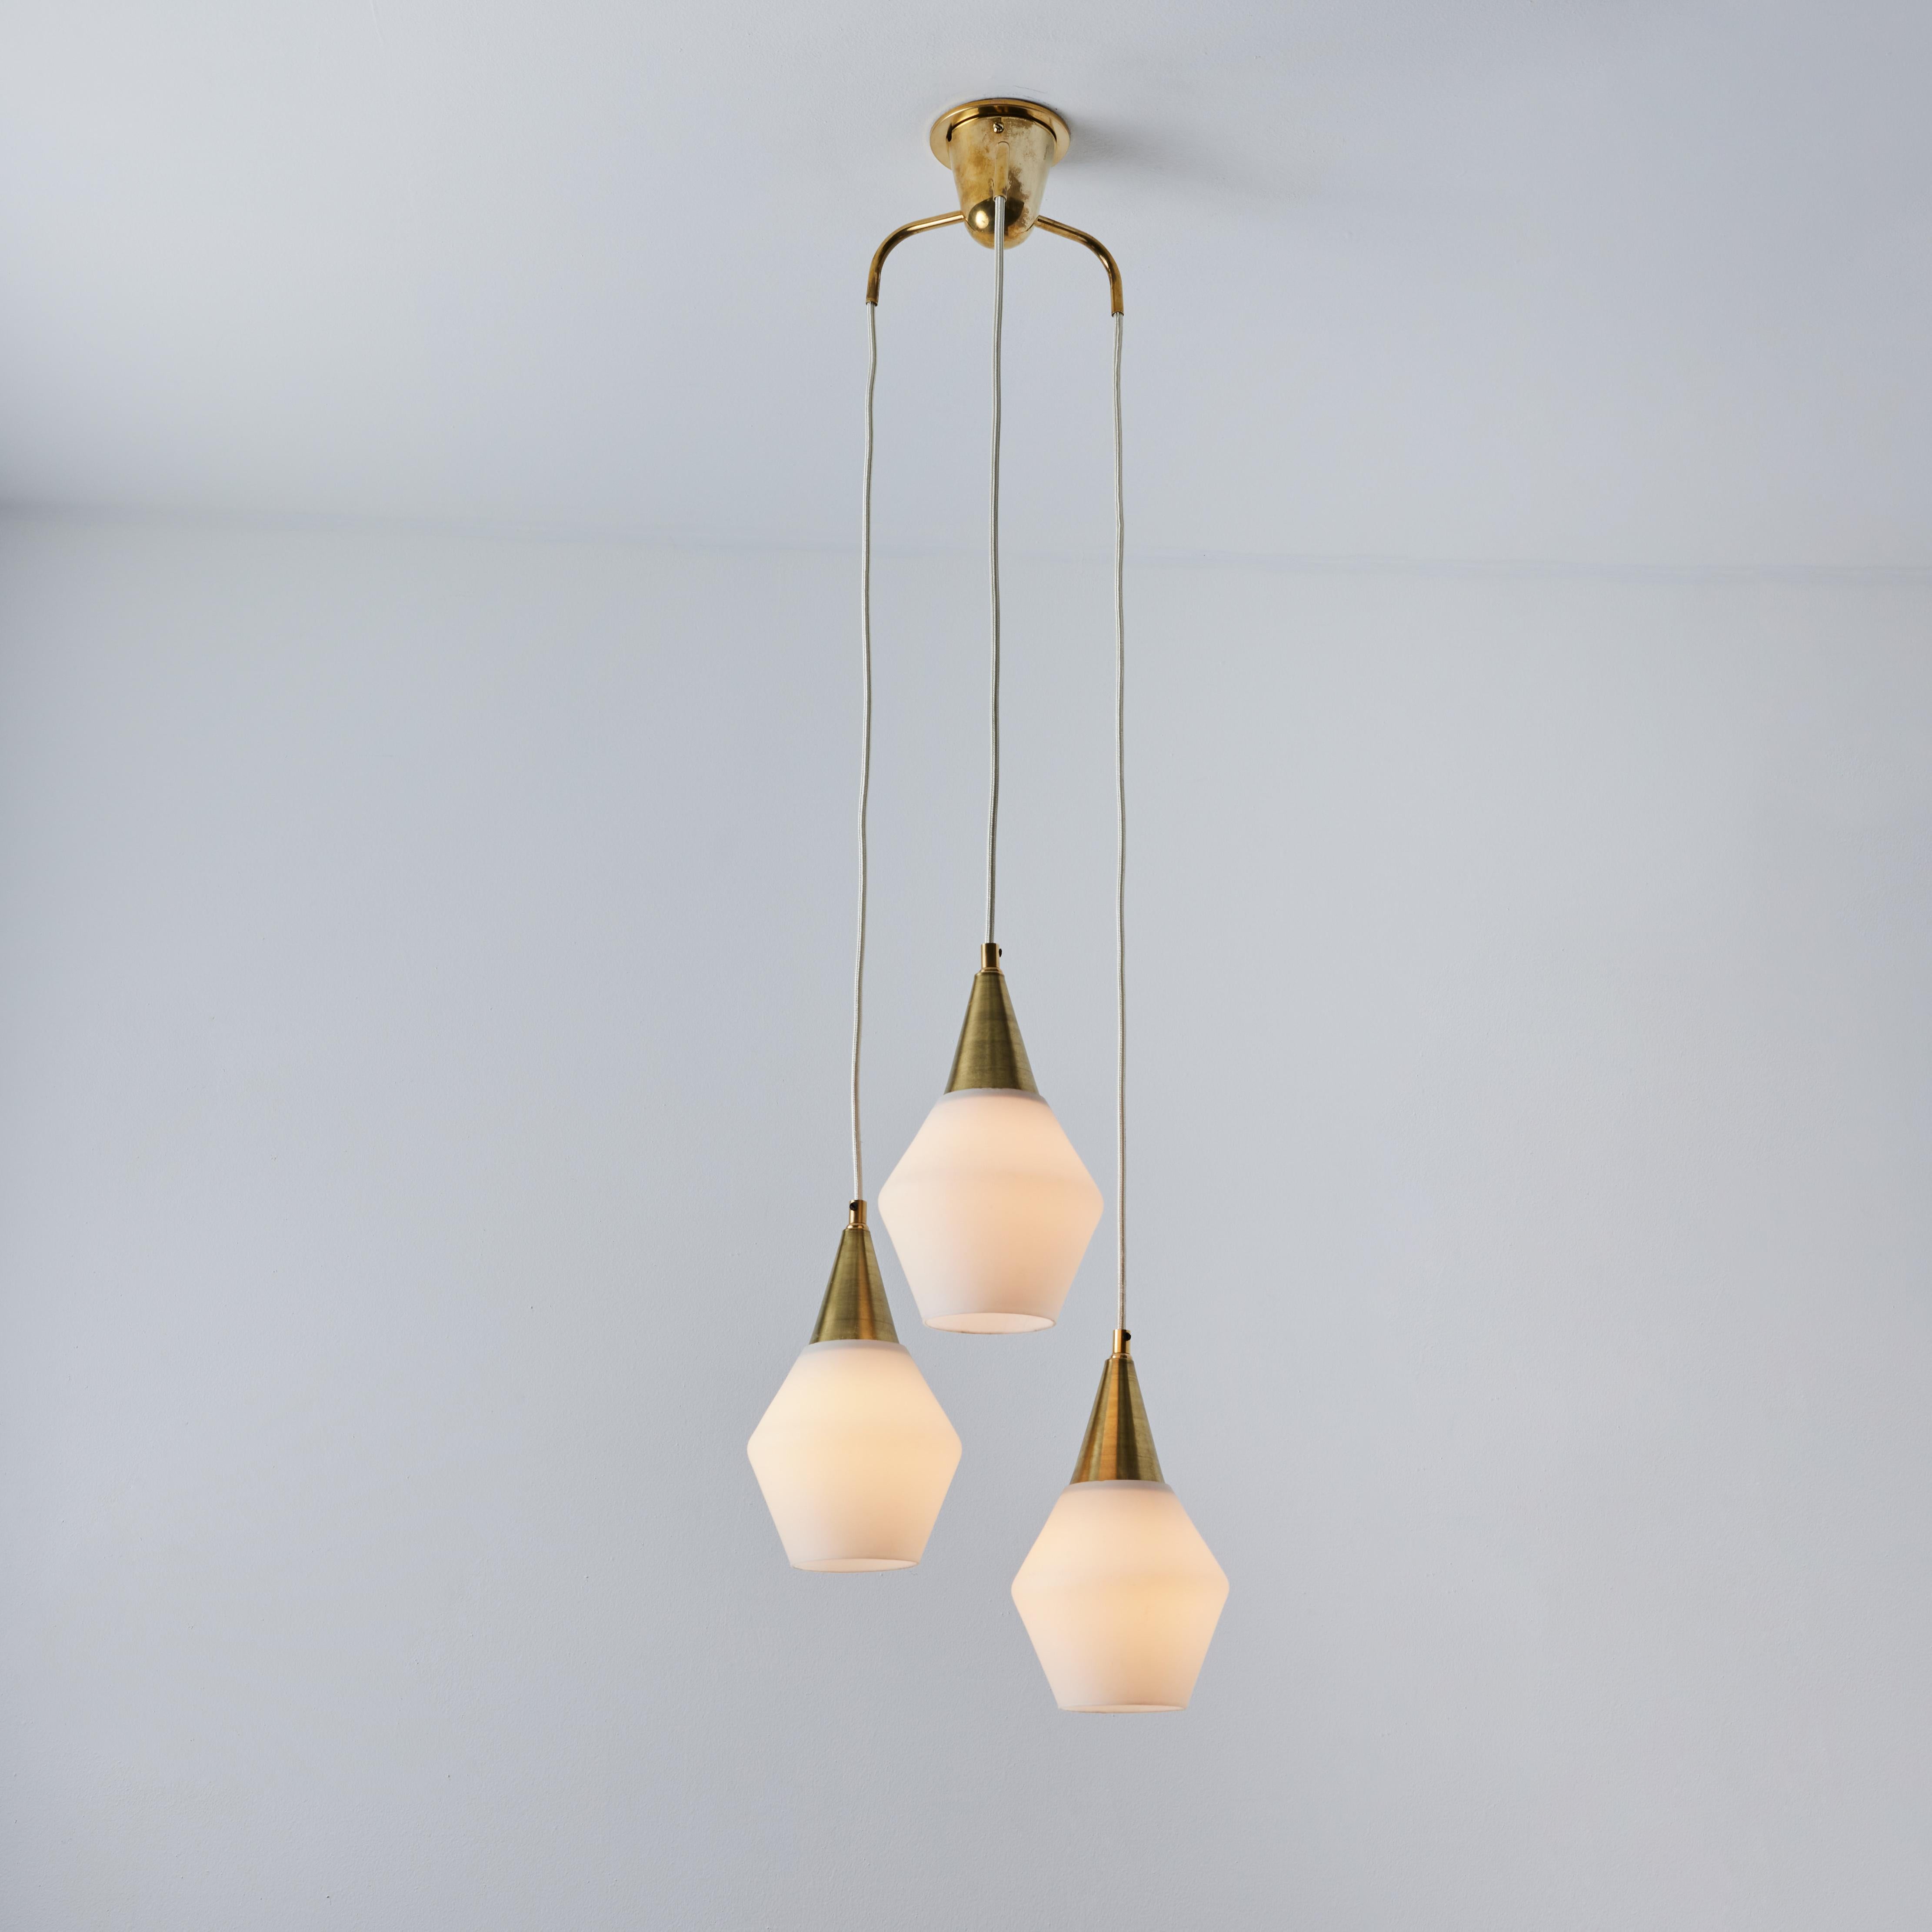 1960s Opaline Glass and Brass Chandelier Attributed to Mauri Almari for Idman. Executed in opaline glass and brass with white cloth cords. Highly reminiscent of Paavo Tynell's iconic designs for Taito Oy. An incredibly refined design that is